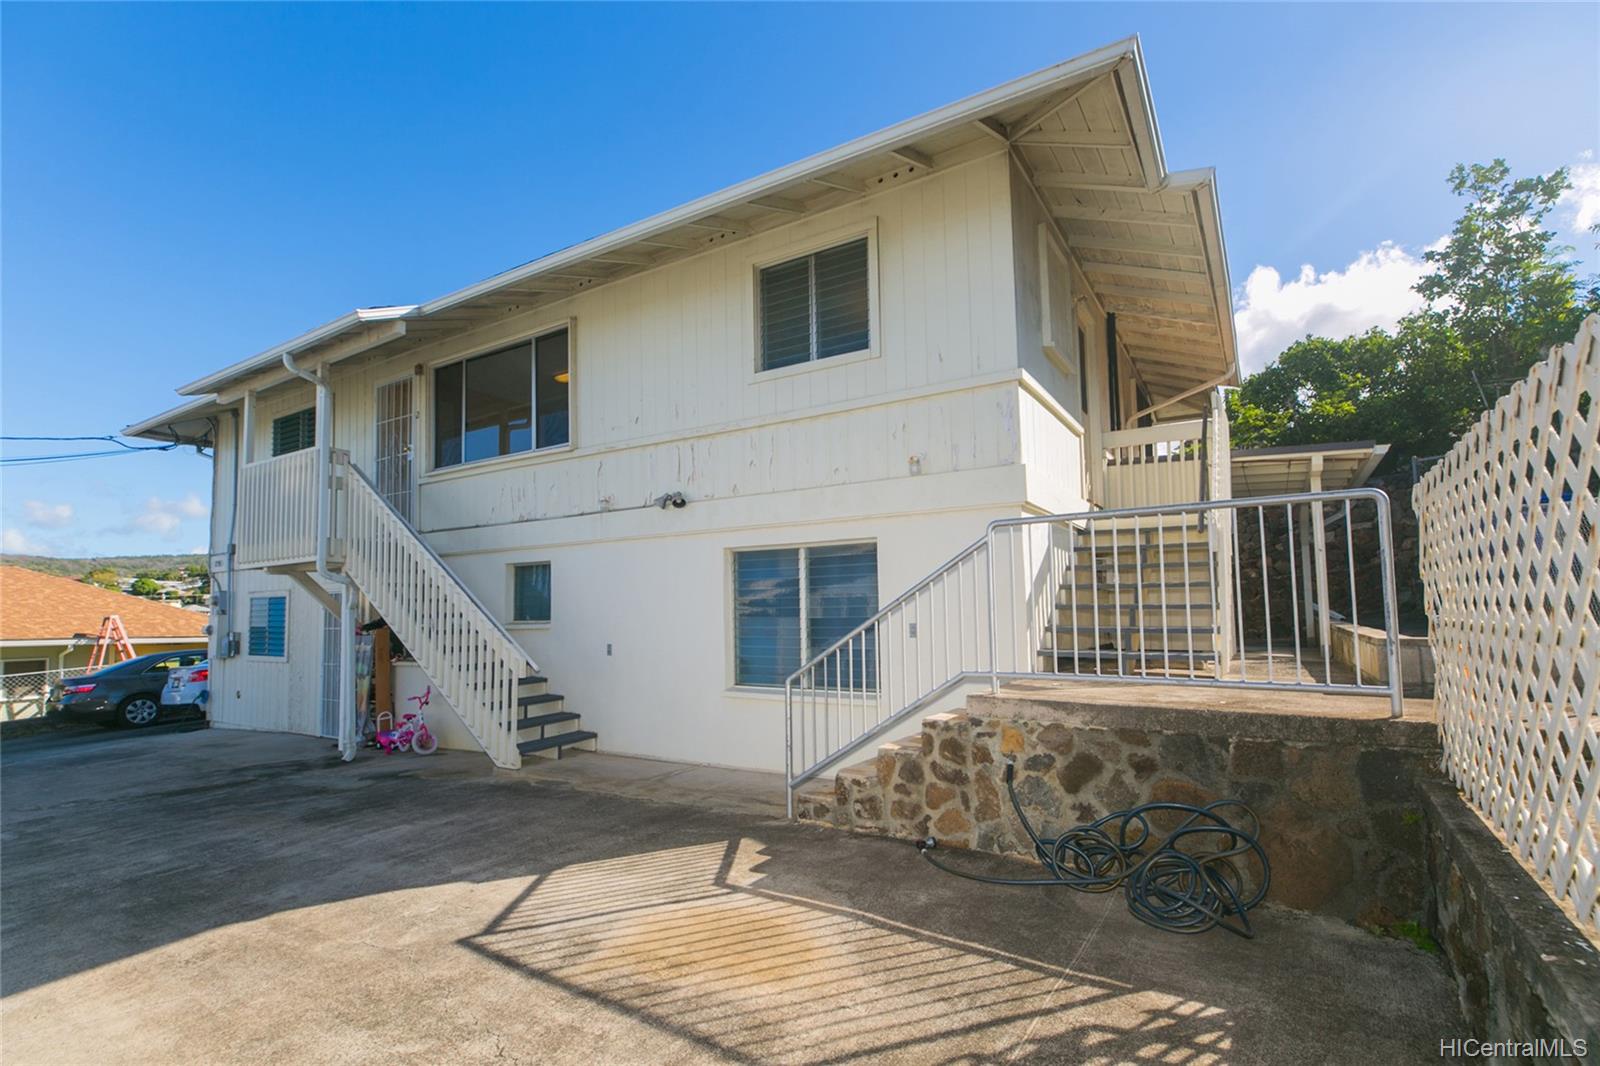 Honolulu Board of REALTORS®: Hawaii Real Estate - Search Homes for Sale,  Rentals, and Virtual Open Houses